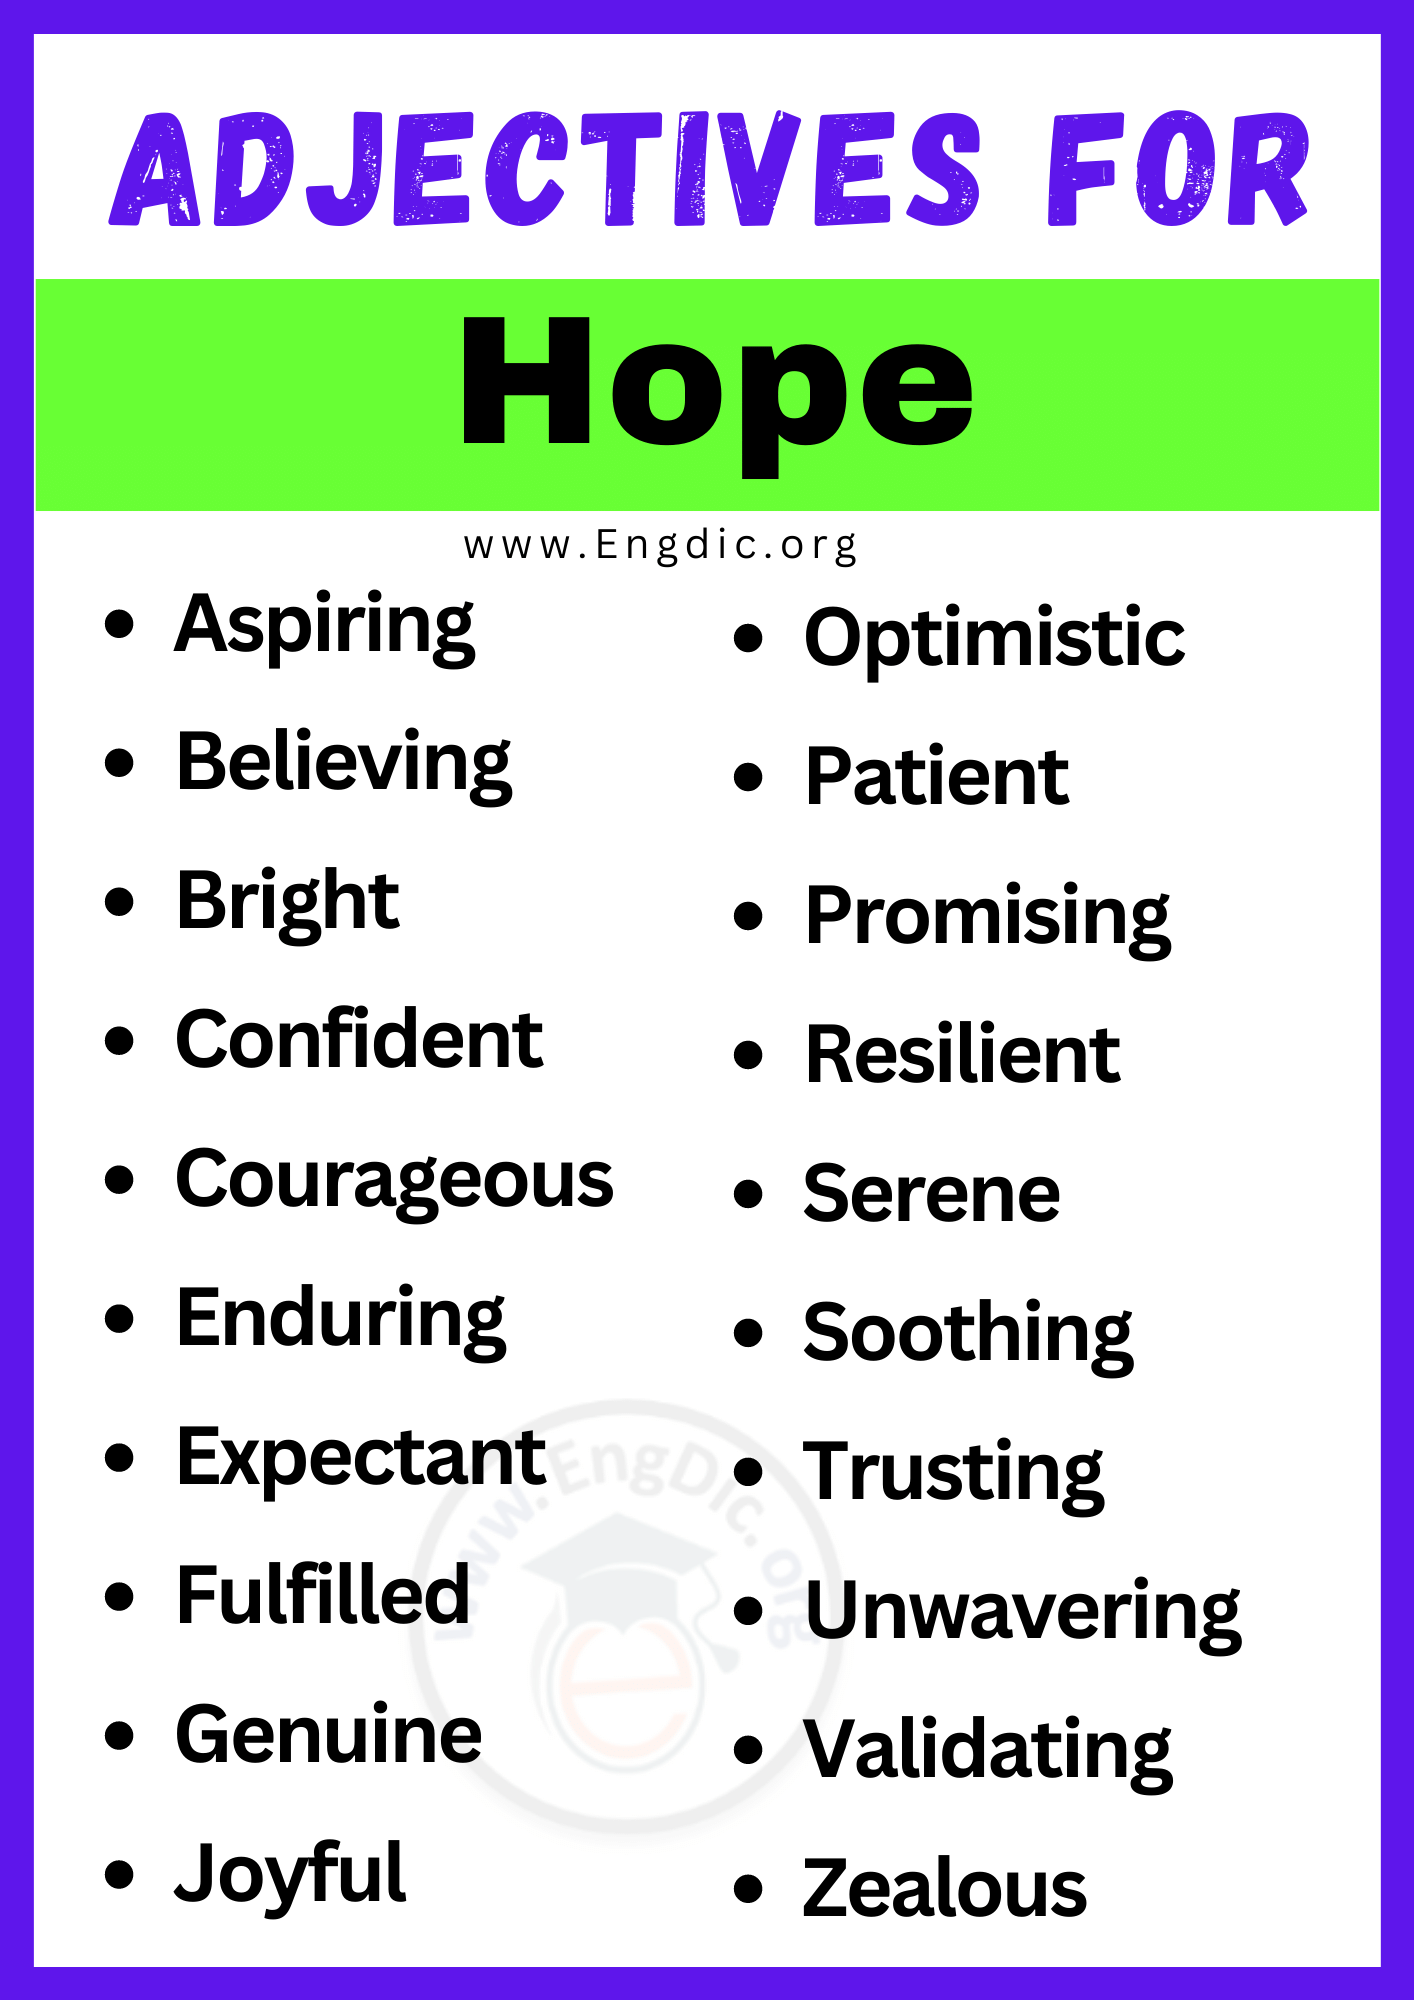 Adjectives for Hope